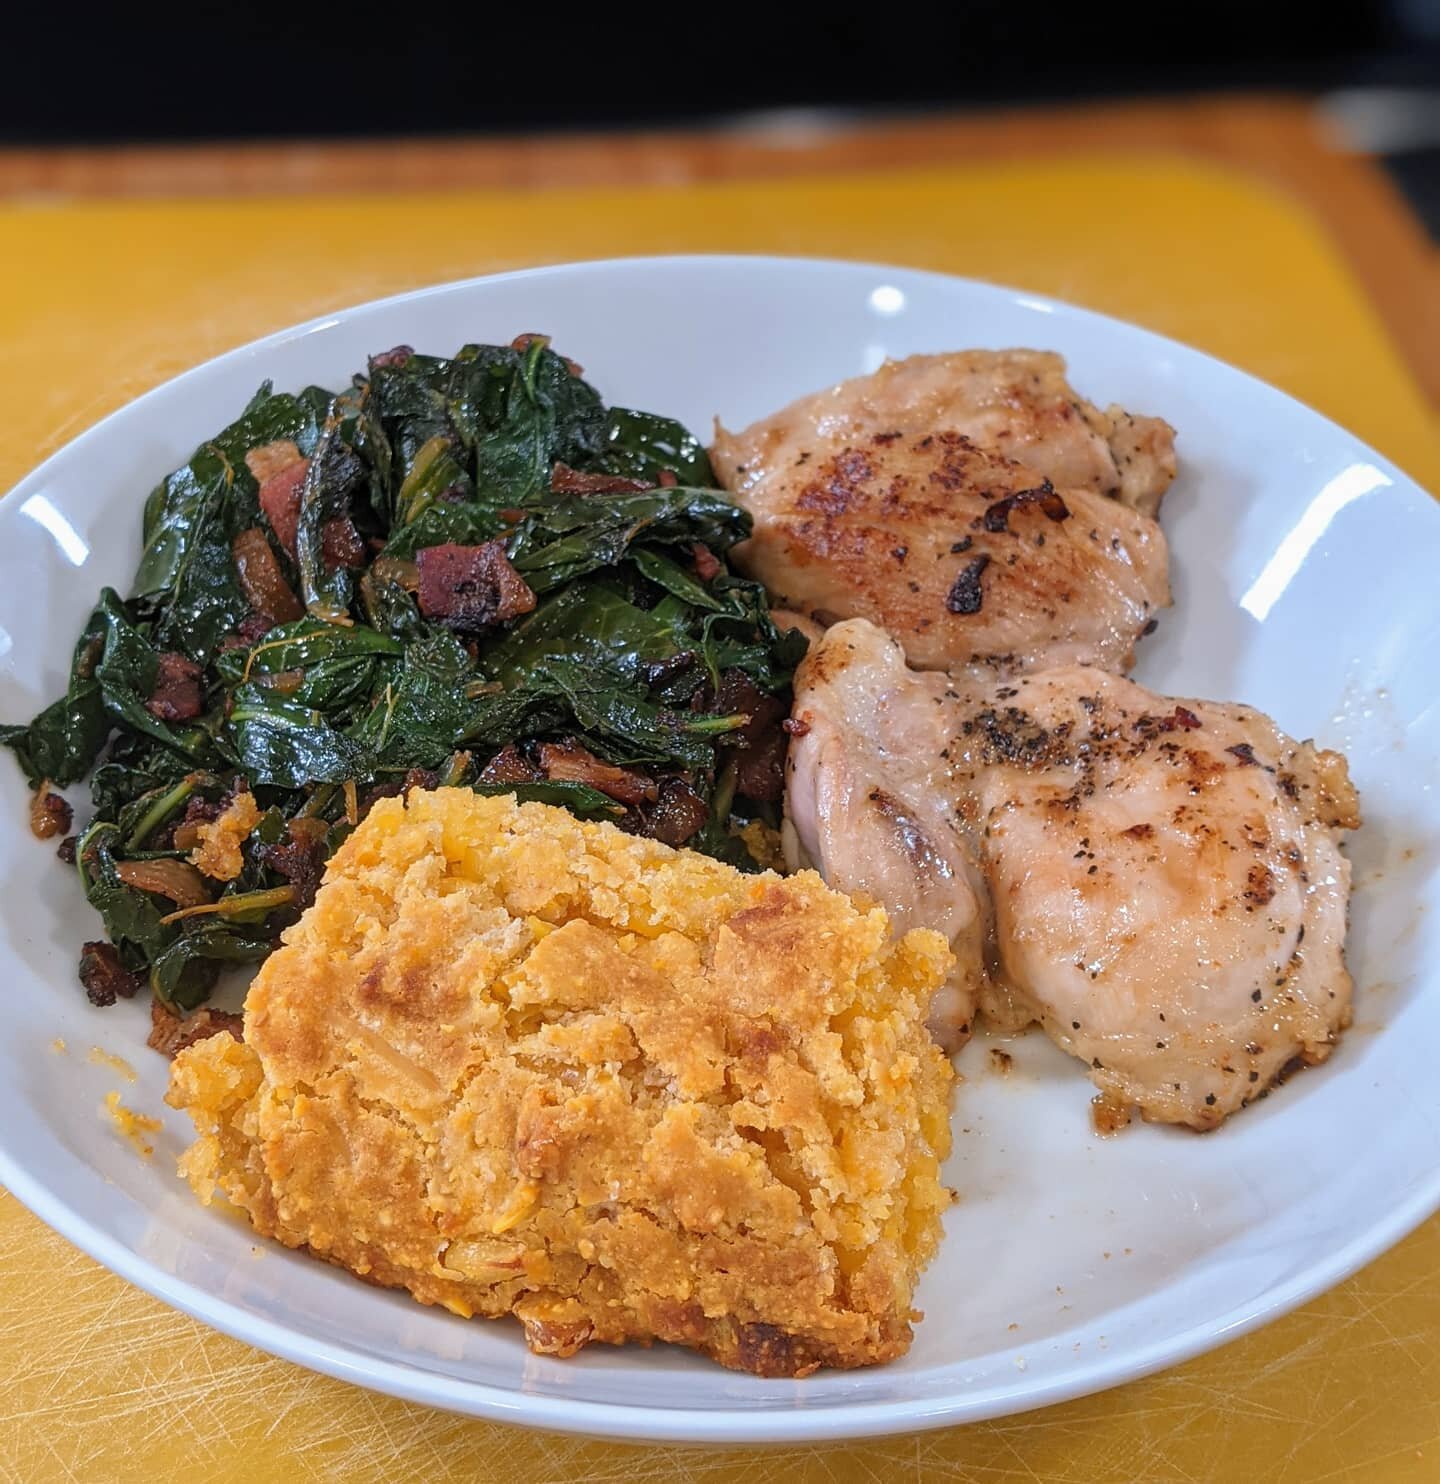 This week's Biscuits Be Cooking class was a win! 😍 We made some of my favorite recipes from childhood, with slightly healthier ingredients! 😎 Aka organic chicken thighs sauteed in ghee vs. fried chicken. Organic collards with uncured bacon. And the